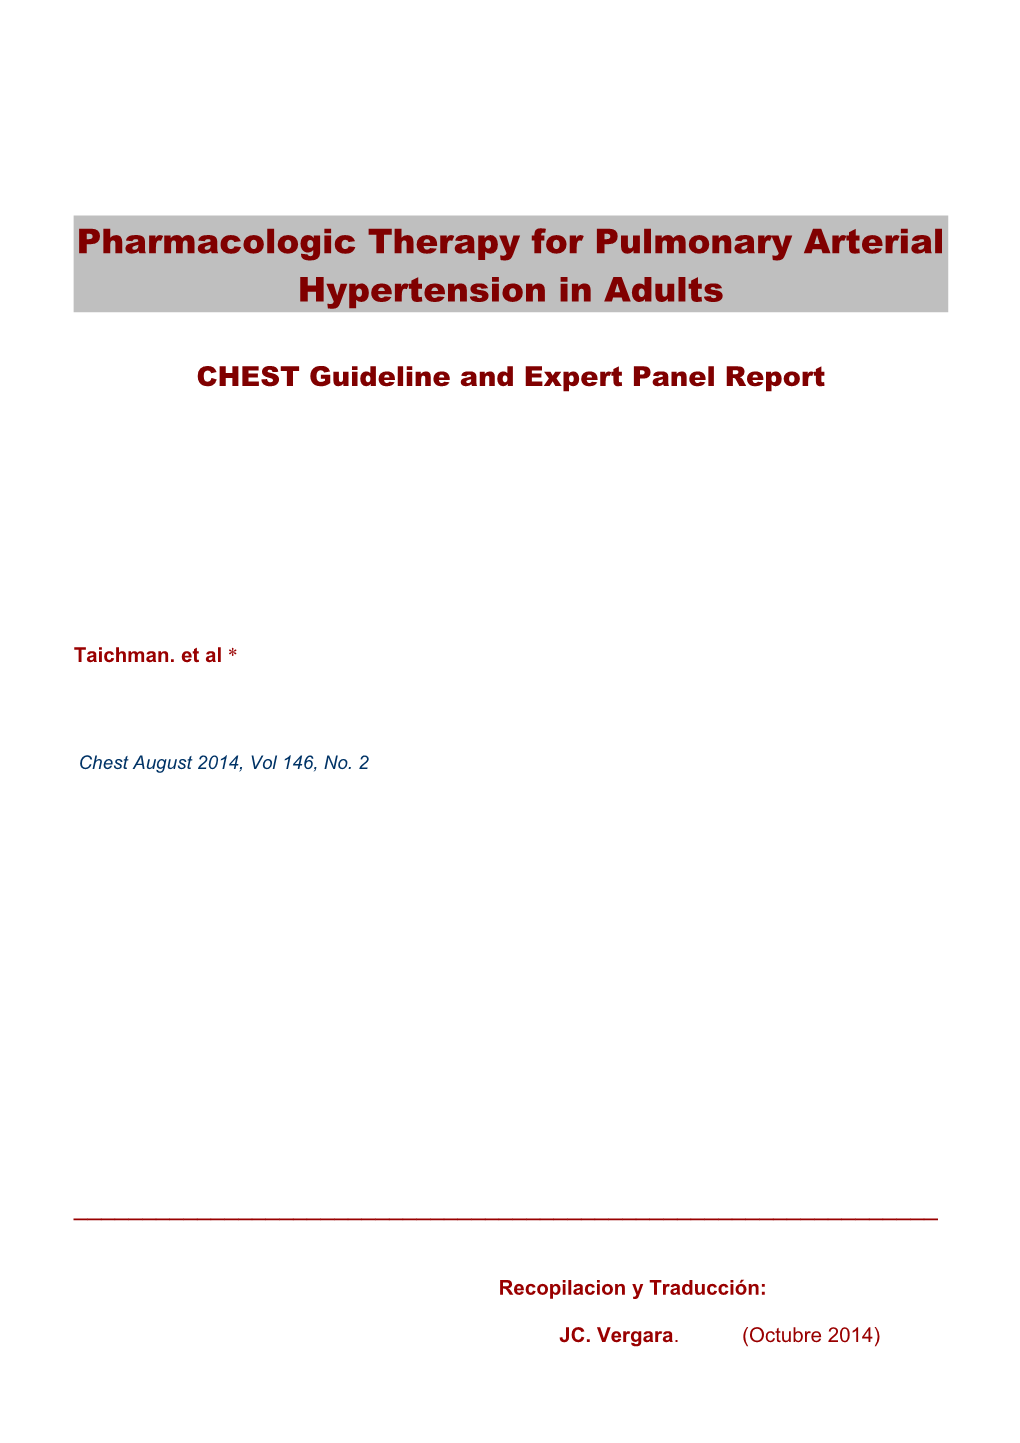 Pharmacologic Therapy for Pulmonary Arterial Hypertension in Adults